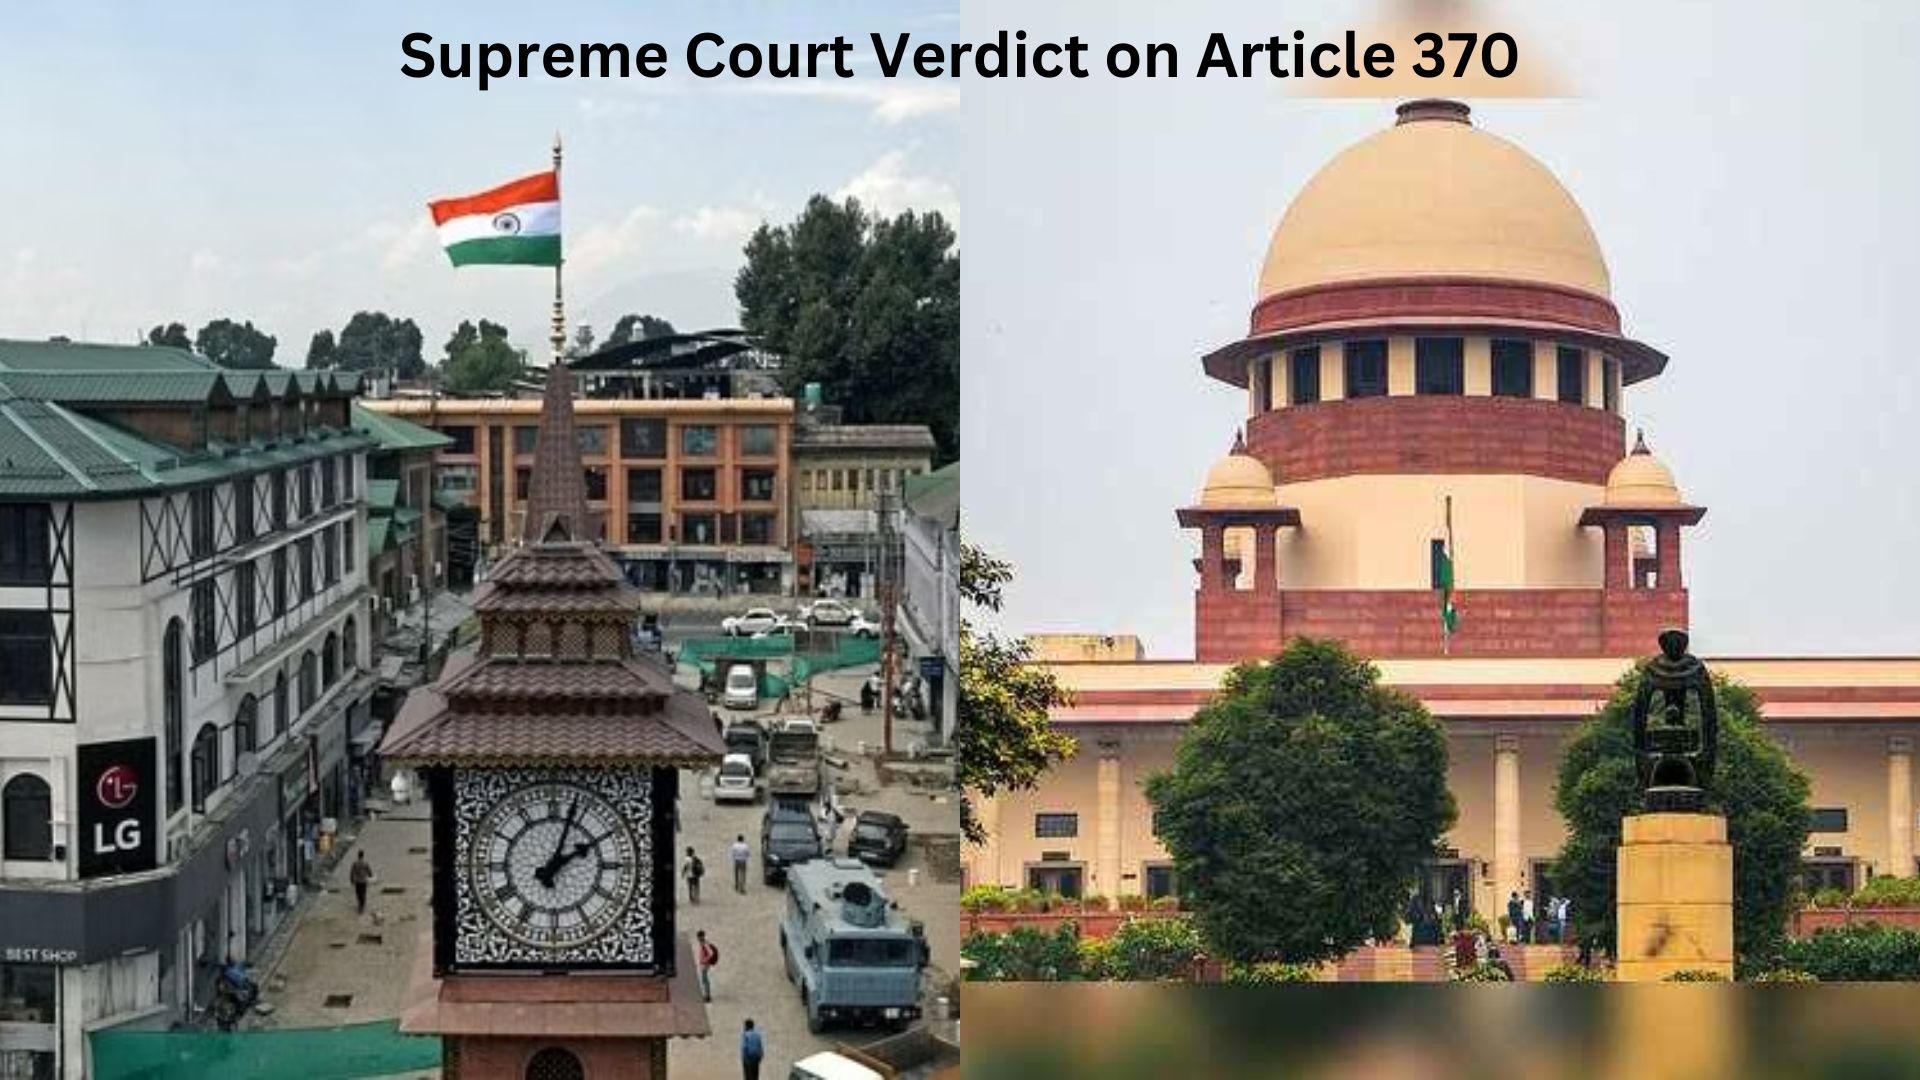 Mehbooba Mufti and Omar Abdullah Reportedly Under House Arrest Following SC Verdict on Article 370